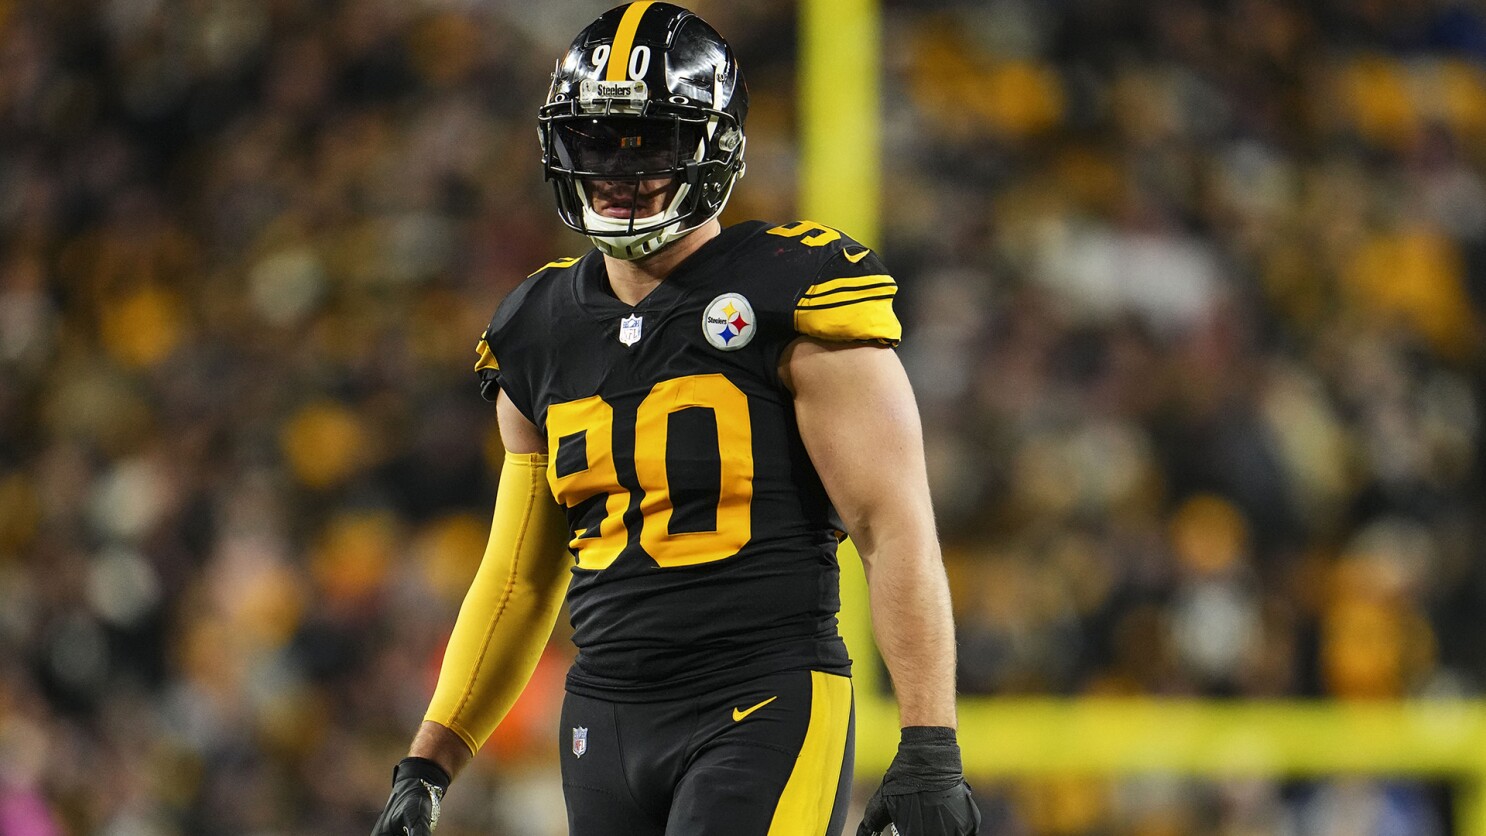 T.J. Watt reported concussion-New symptoms Reported today